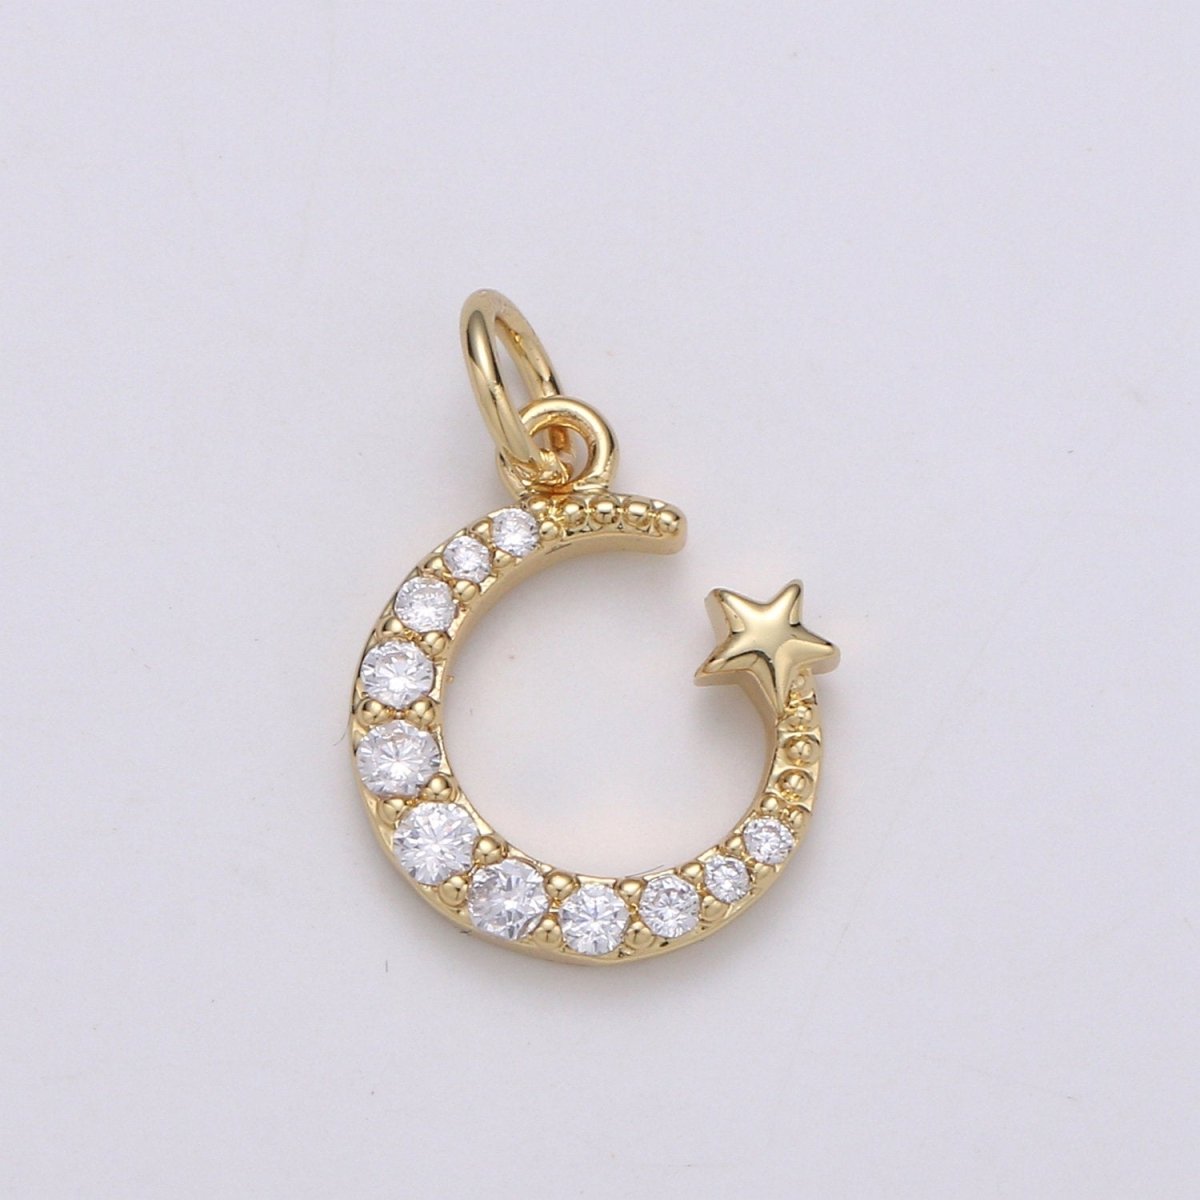 Tiny 14k Gold Filled Micro Pave Moon Charm, Cubic Zirconia Moon Star Pendant Charm, Celestial Charm Necklace Earring Bracelet DIY Jewelry C-821 - DLUXCA